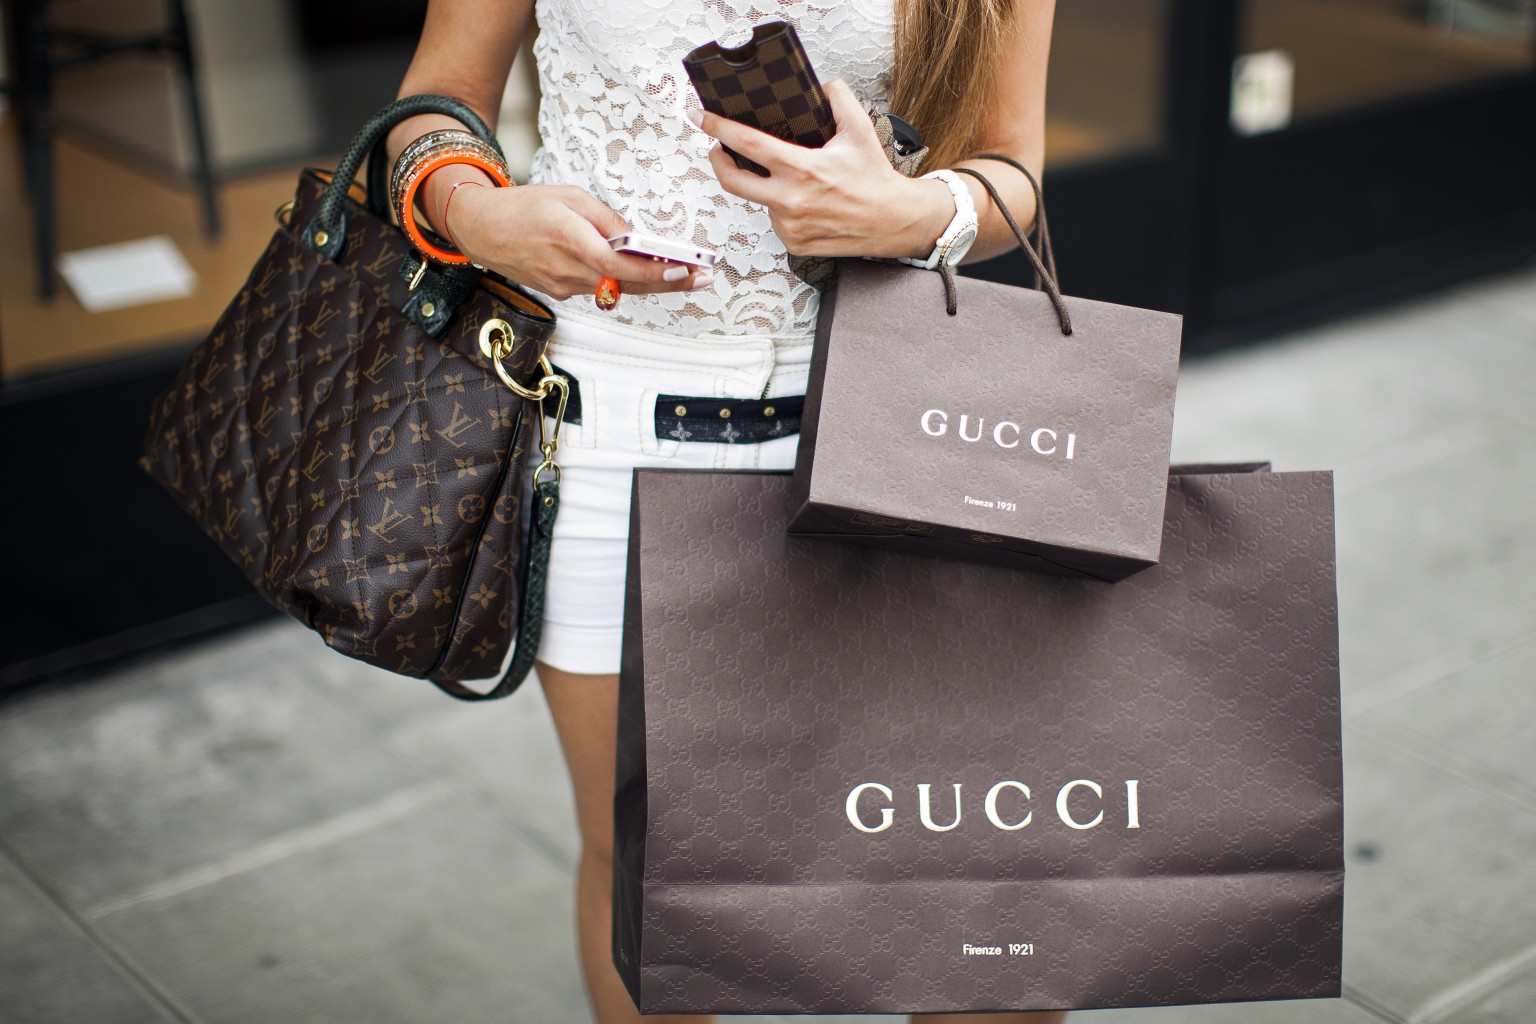 Women Use Designer Bags To Fend Off Jealous Would-Be Man Stealers, Study Claims | HuffPost